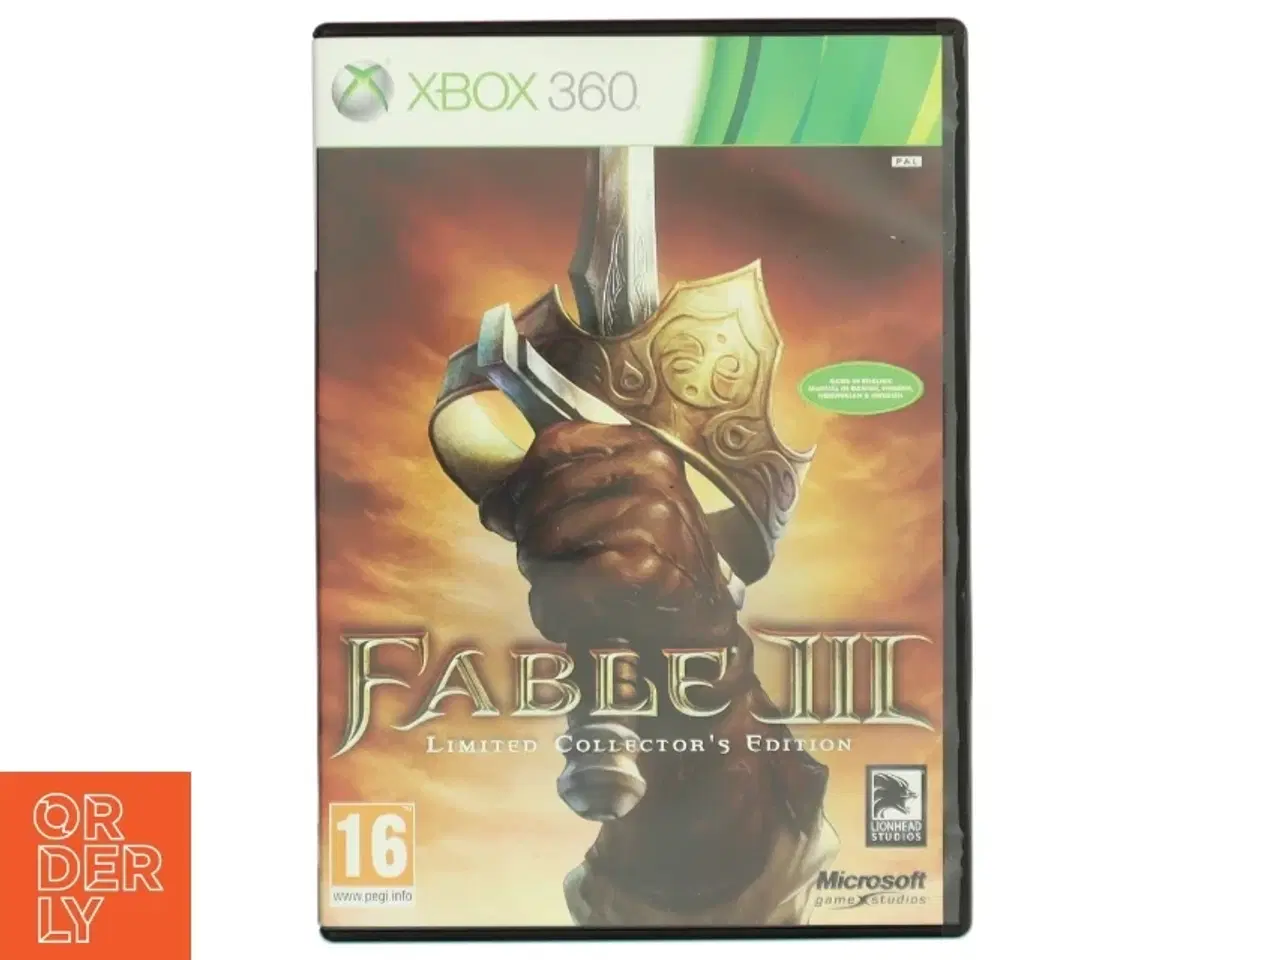 Billede 1 - Fable III Limited Collector's Edition Spil fra Microsoft